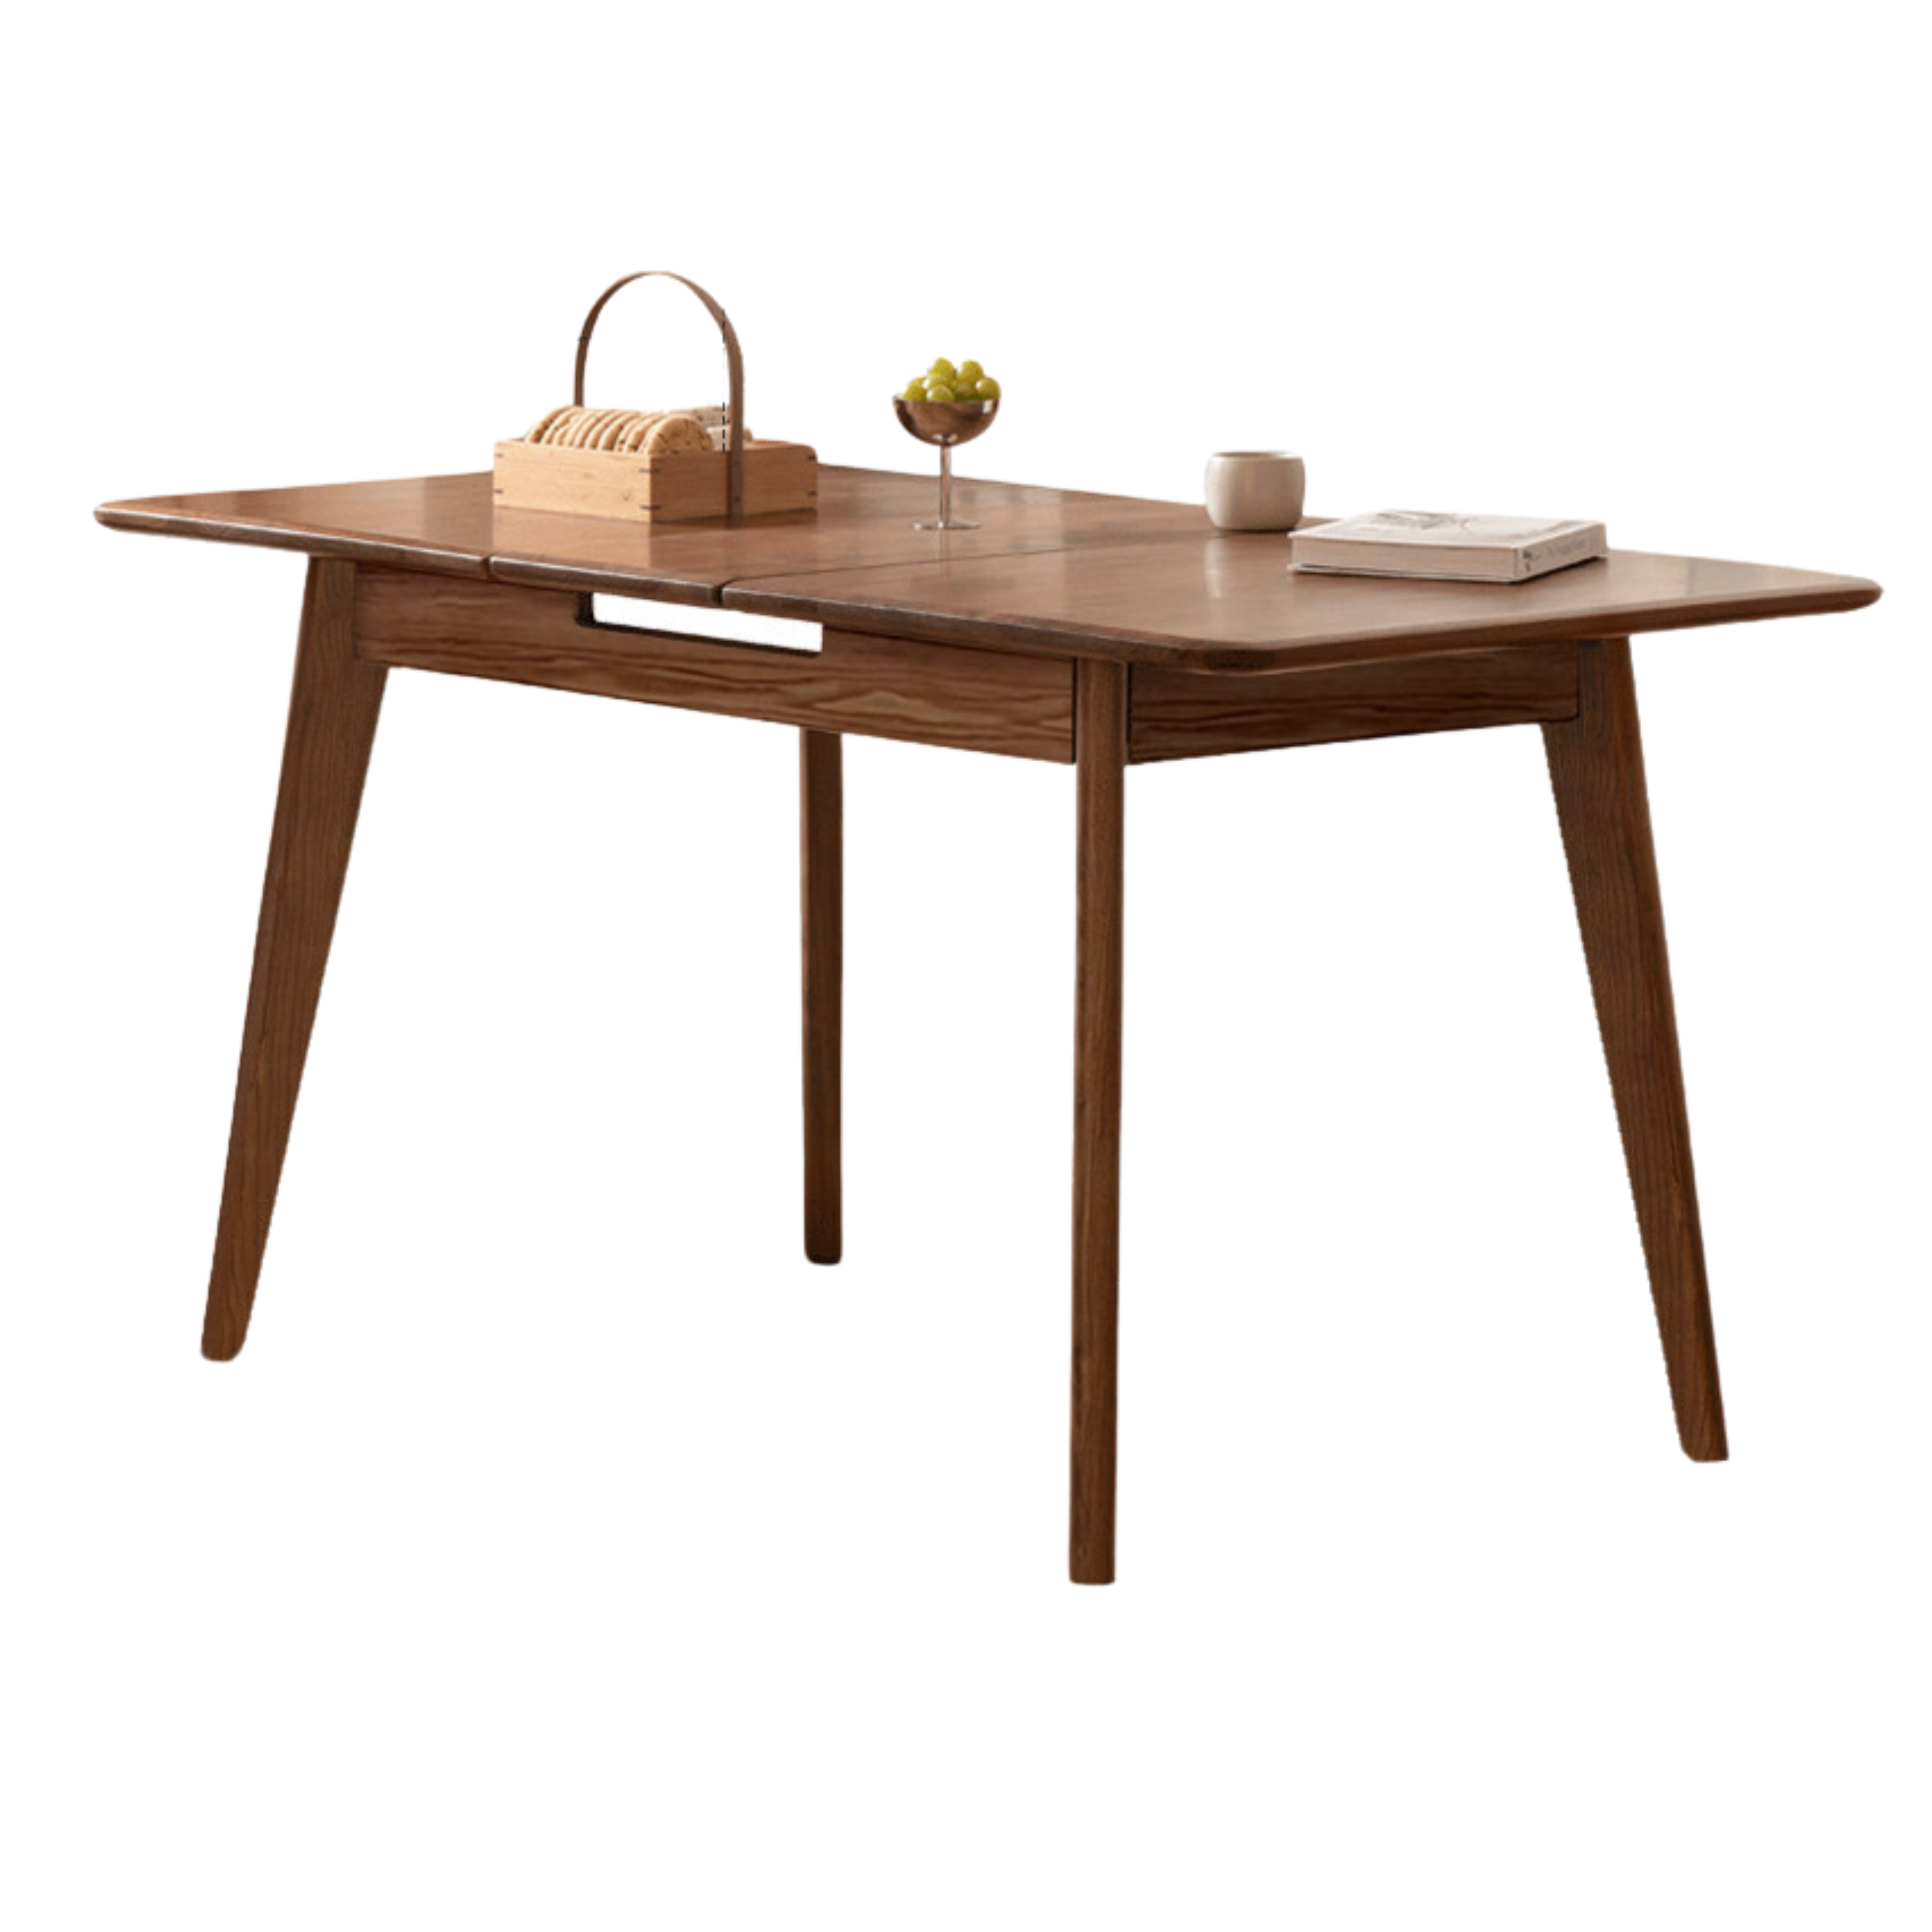 Black Walnut solid wood Telescopic retractable Dining Table